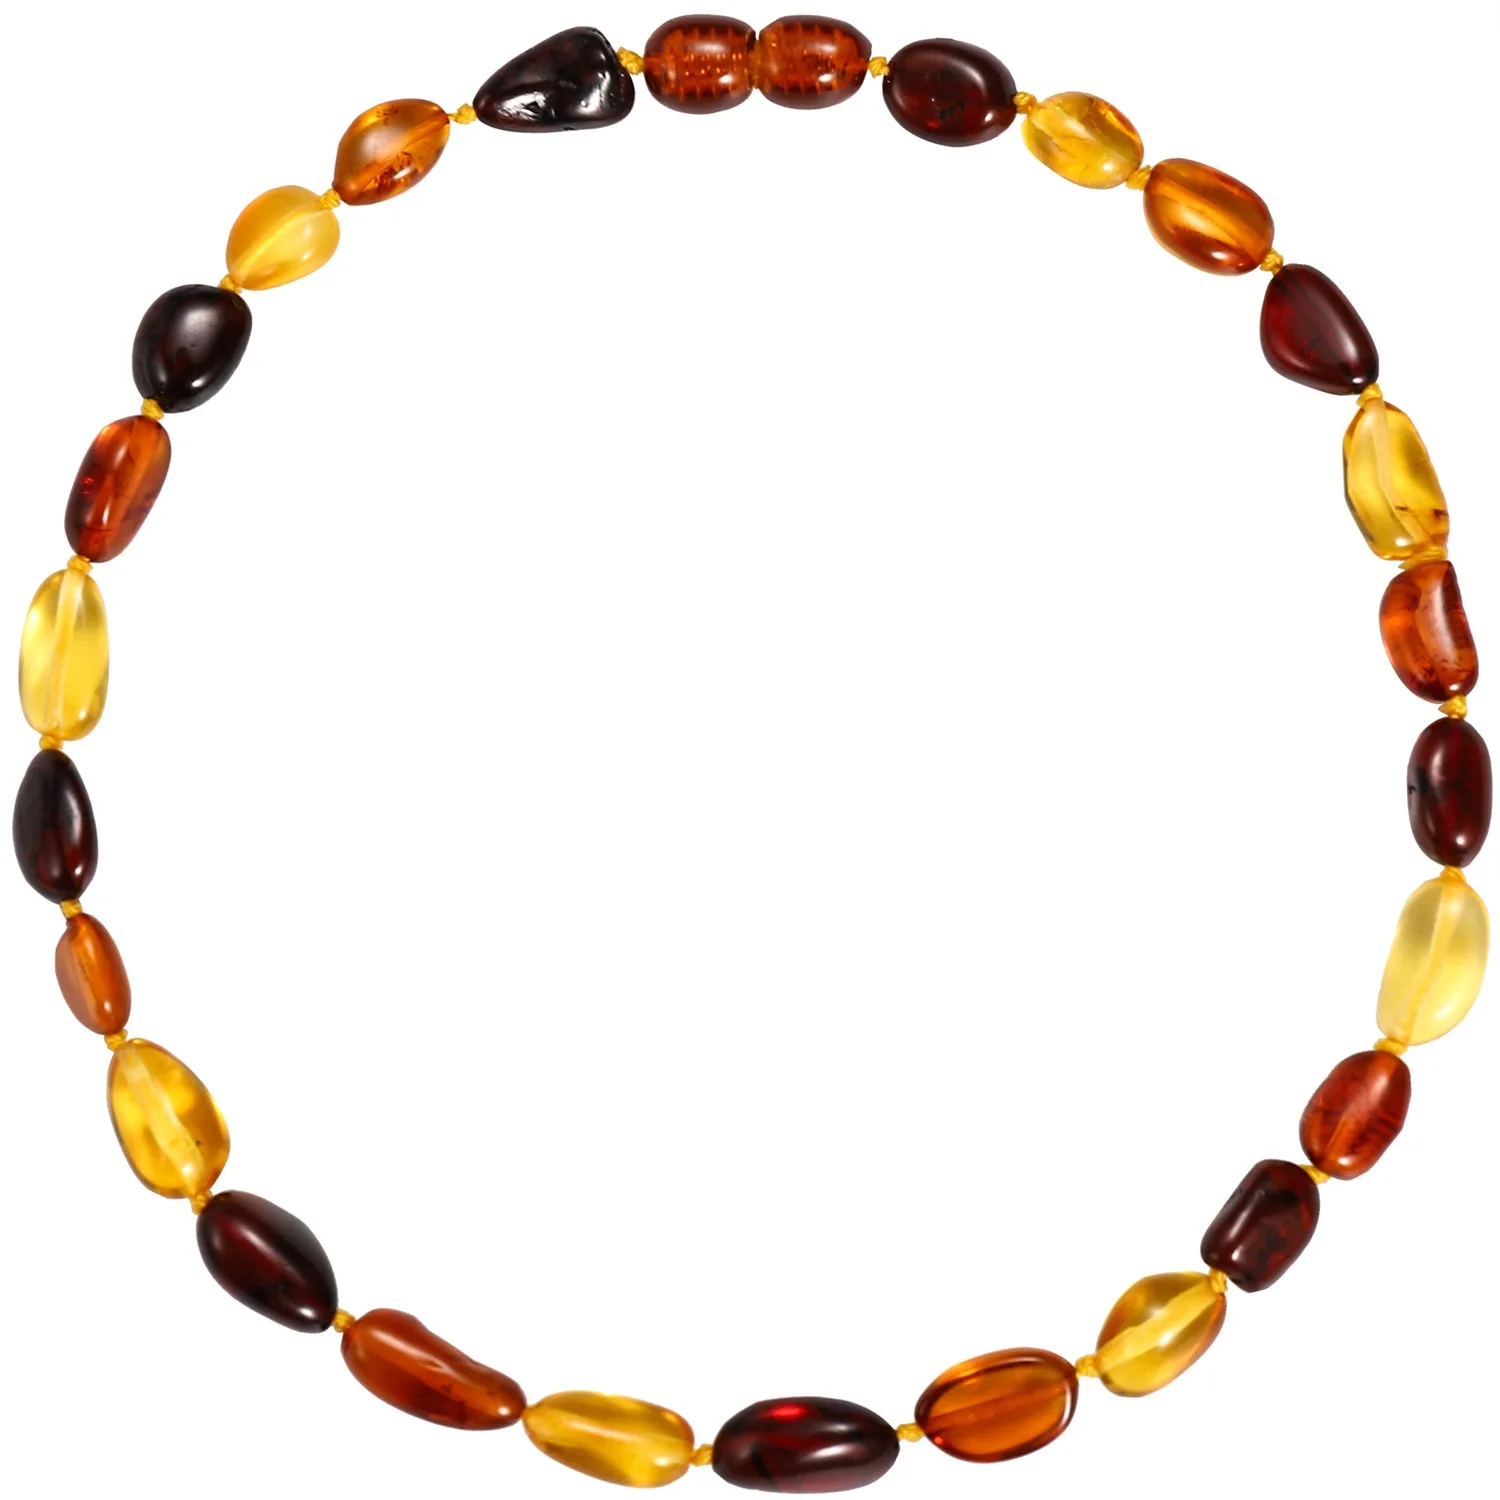 

DY Fashion new born baby gift Real Amber Necklace multicolor 5-7mm bean baltic Amber Teething Necklace for Babies